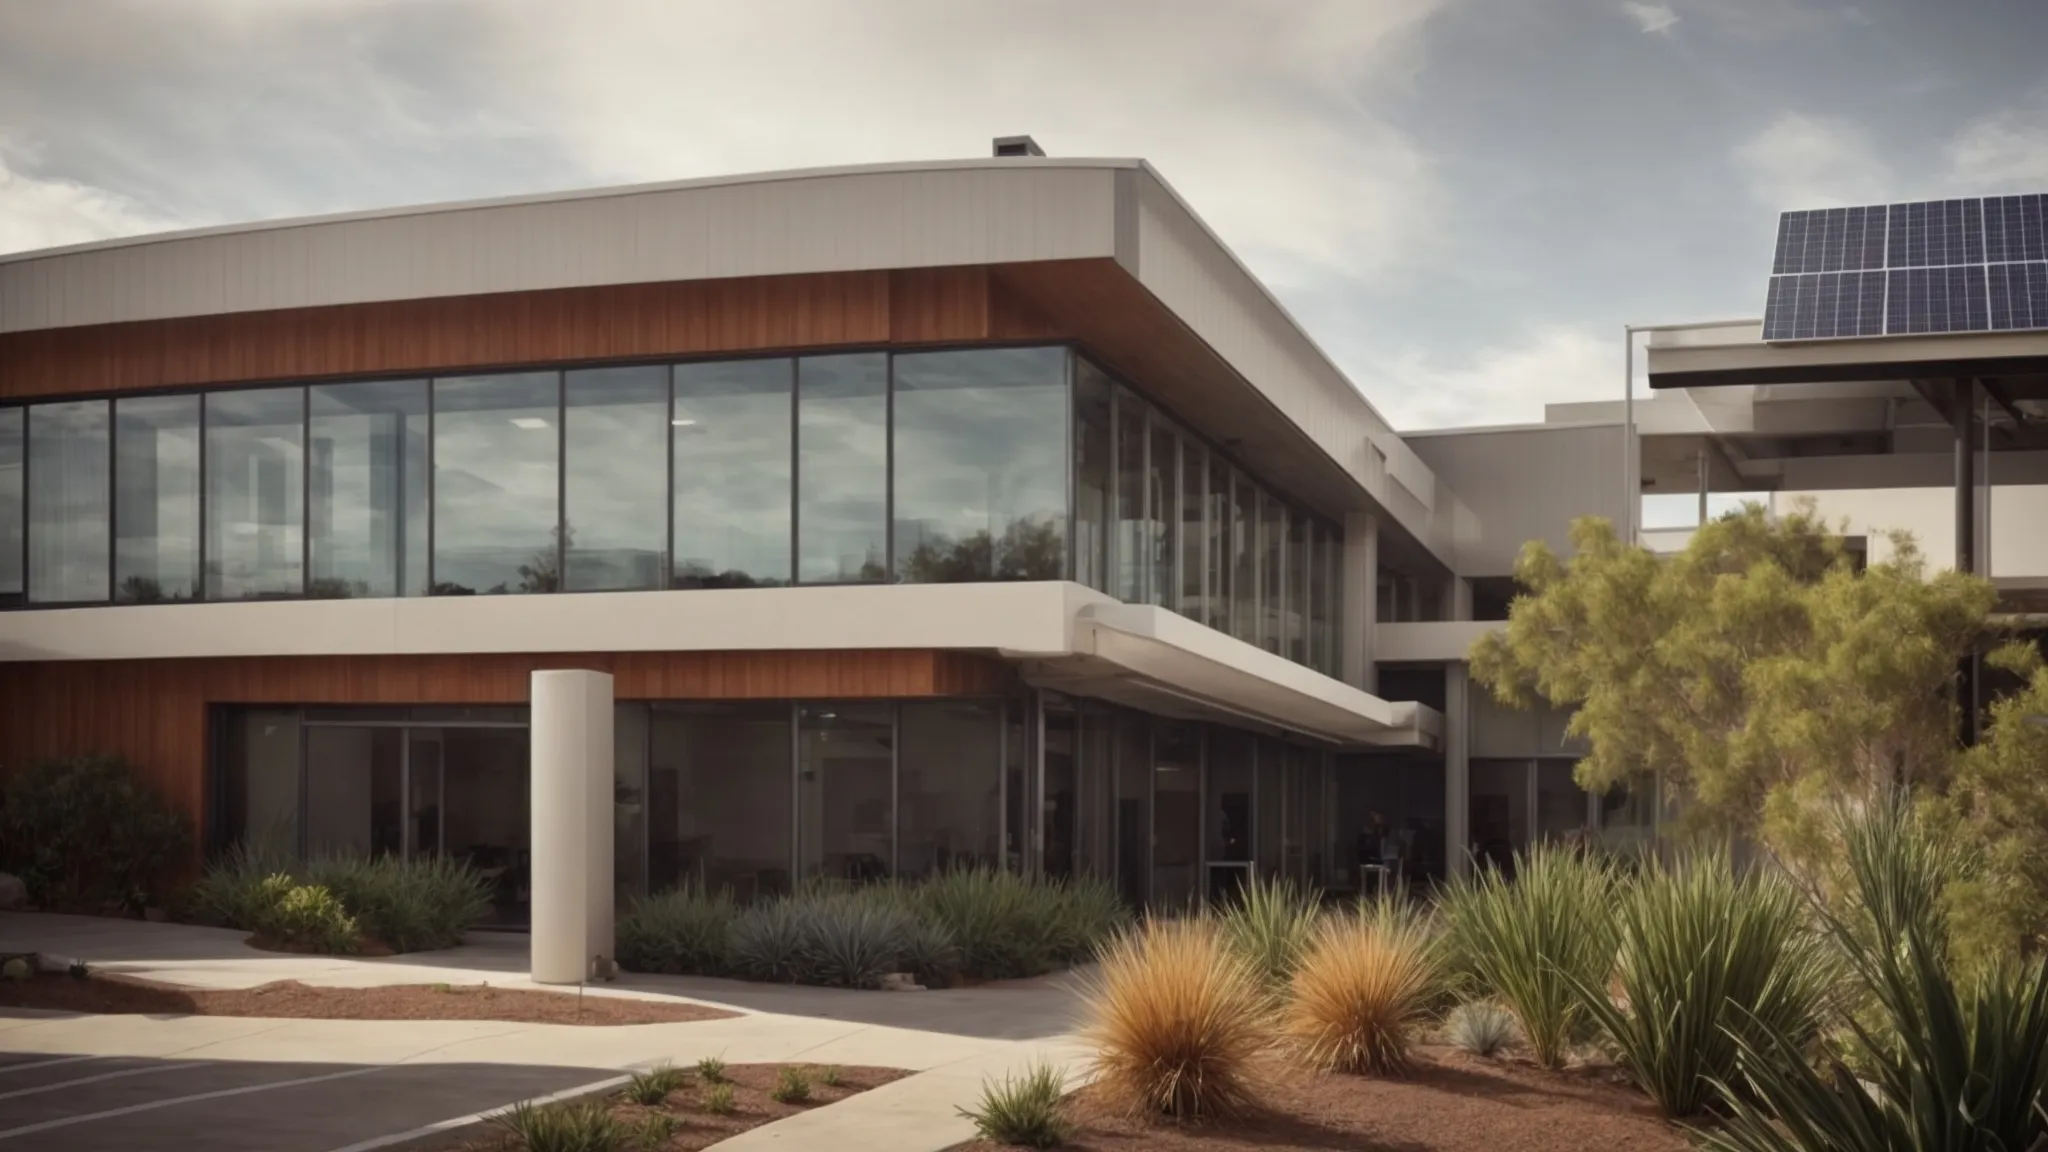 Show an image of a modern office building in San Diego with large windows, solar panels on the roof, and walls made of recycled materials. Include landscaping with drought-resistant plants and a rainwater collection system.